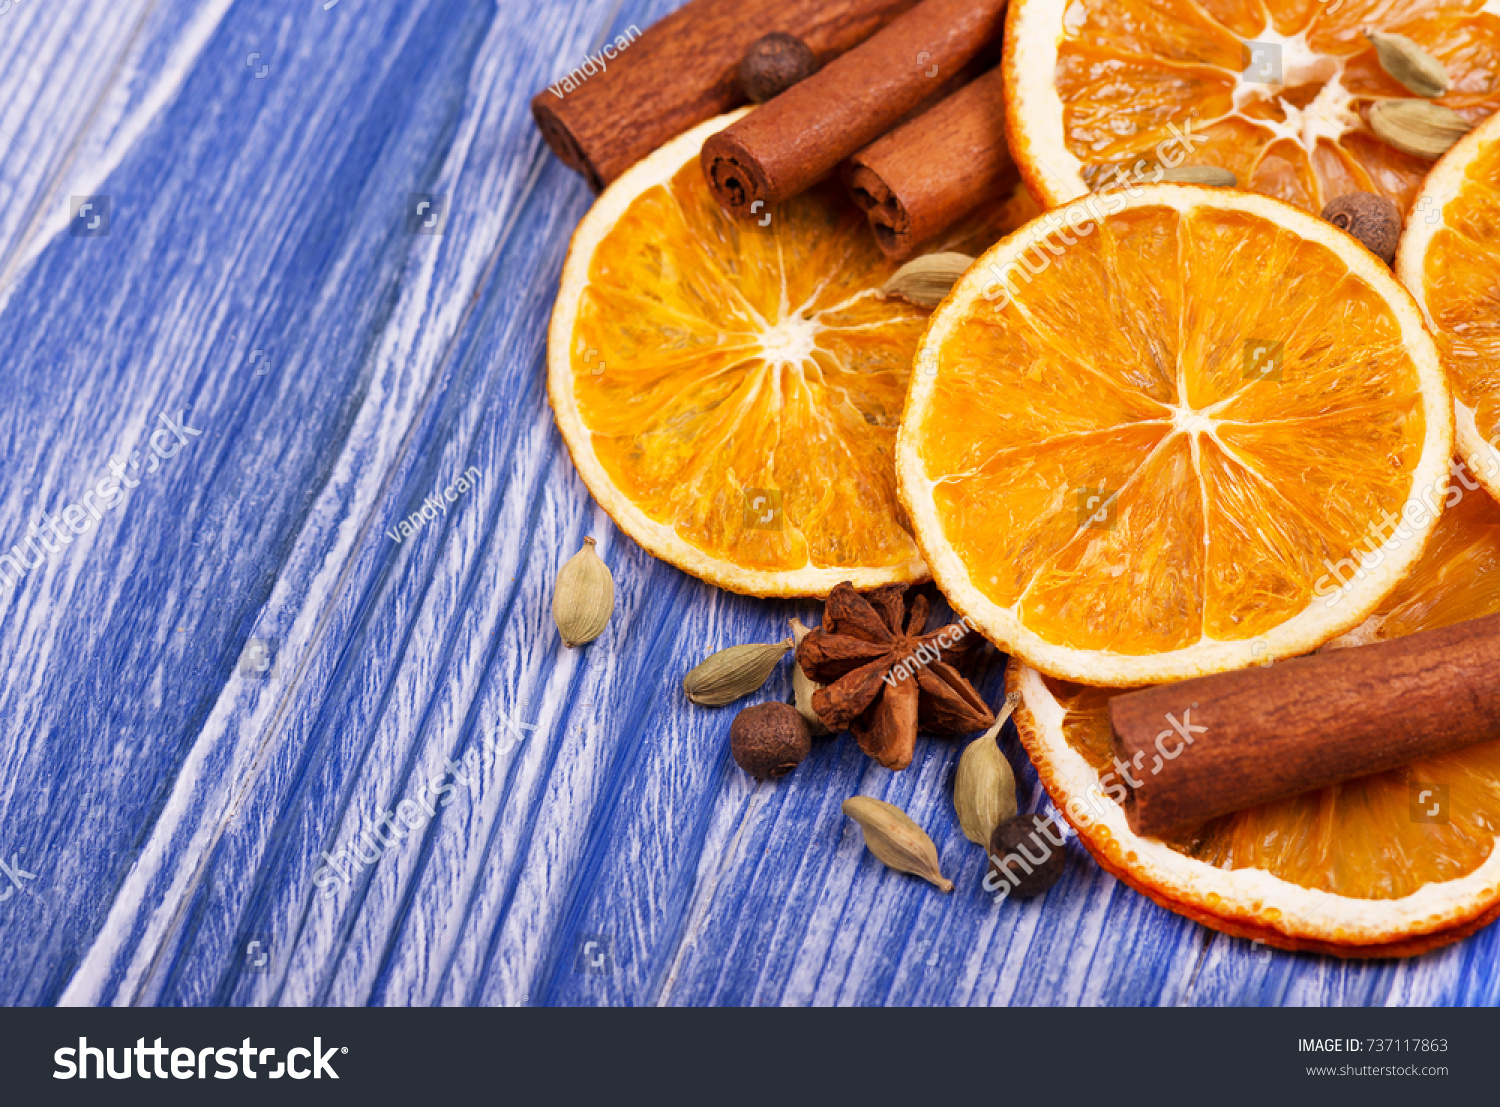 Dry slices of orange, cinnamon, allspice and cardamom on a blue wooden background #737117863